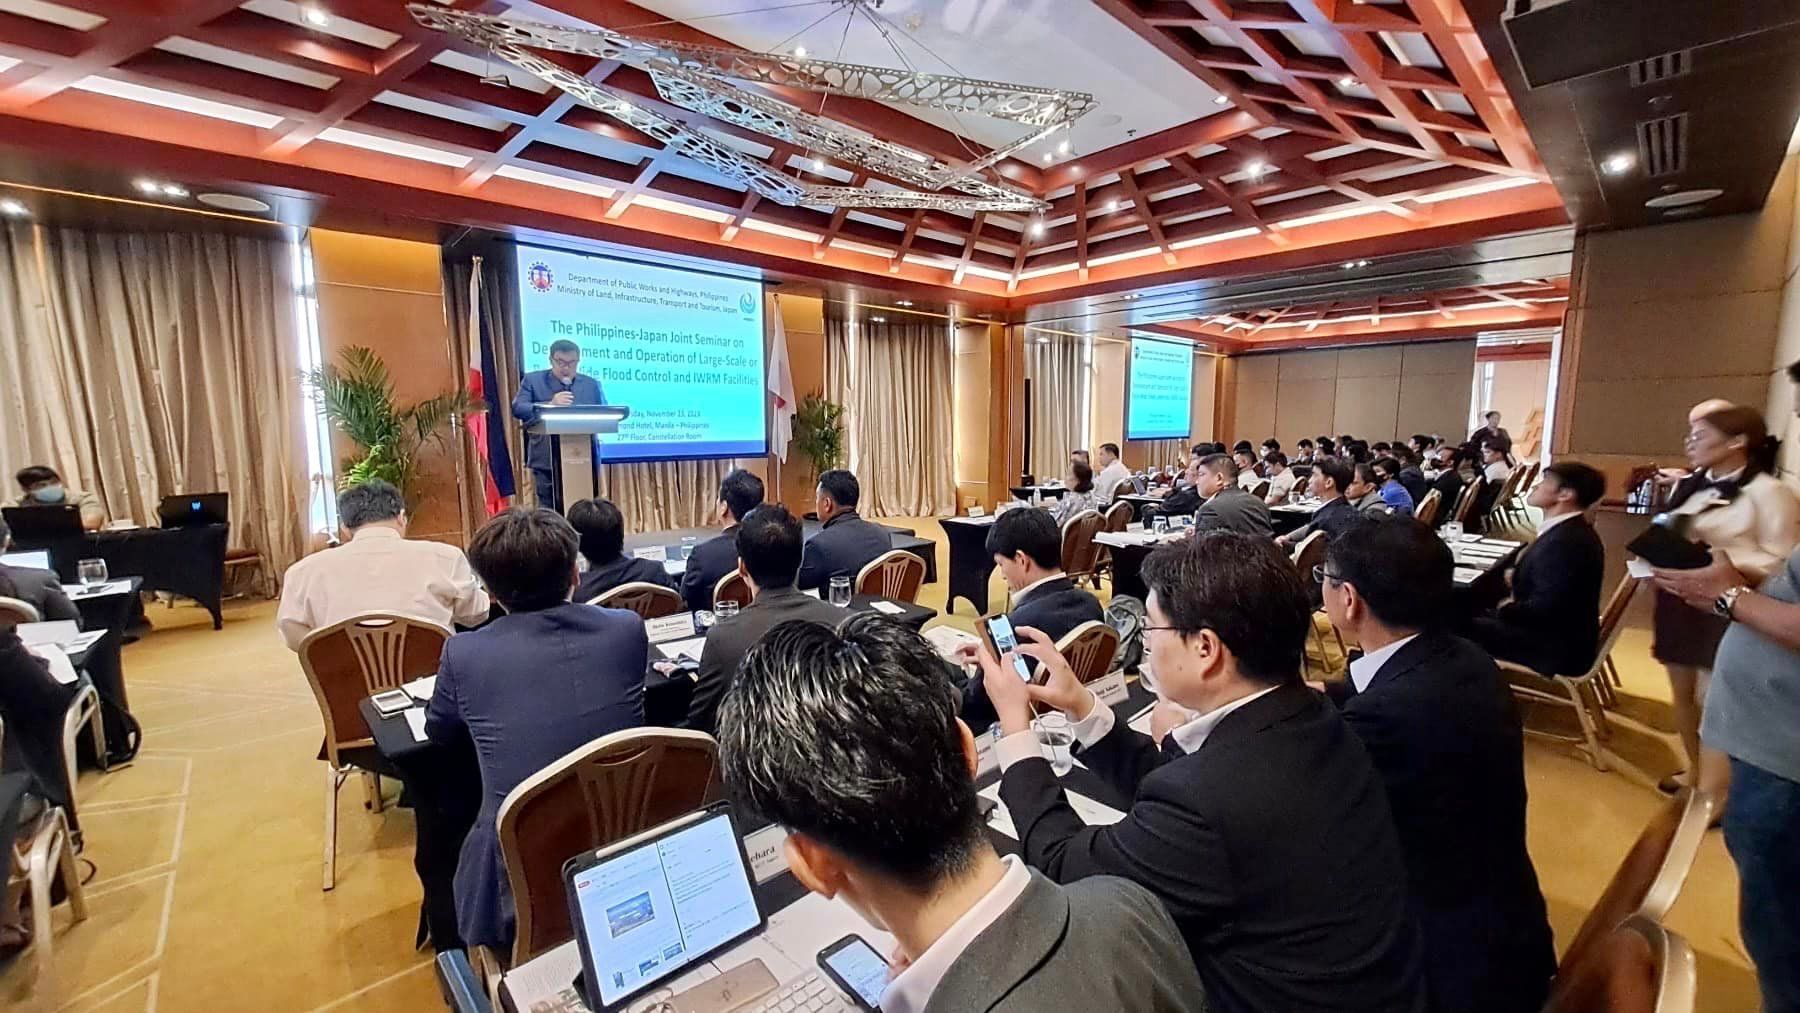 DPWH-MLIT JAPAN HOLD SEMINAR  ON LARGE-SCALE FLOOD CONTROL MANAGEMENT,  WATER RESOURCES FACILITIES 